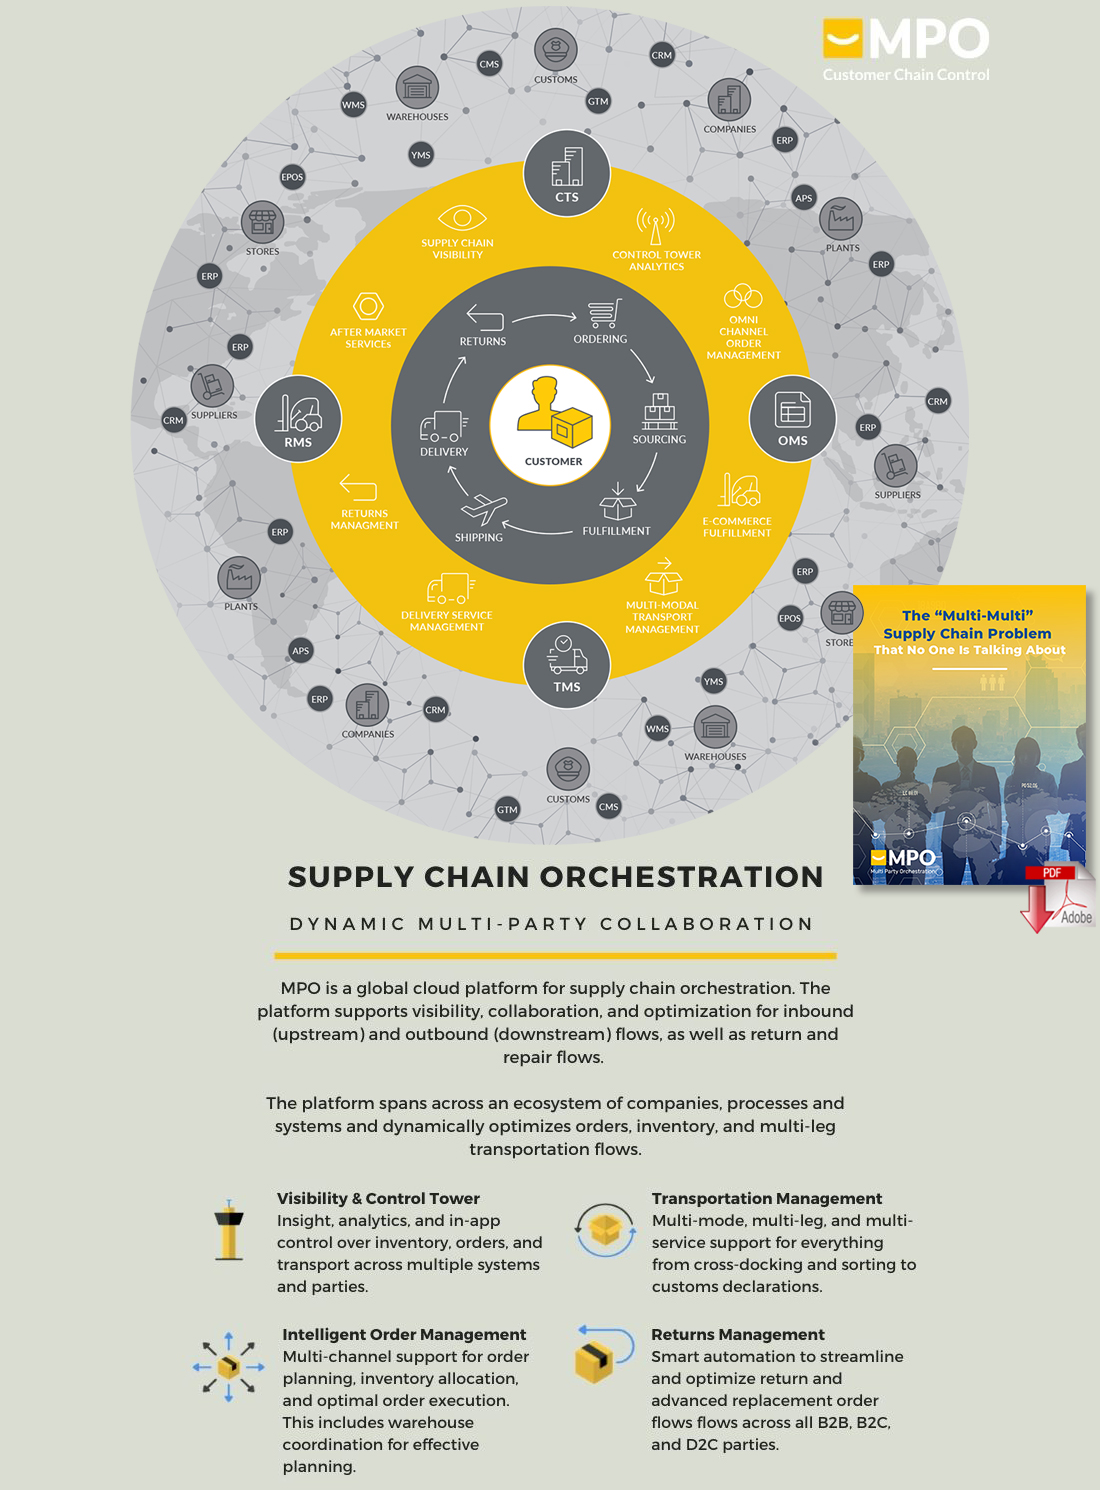 Download The “Multi-Multi” Supply Chain Problem That No One Is Talking About